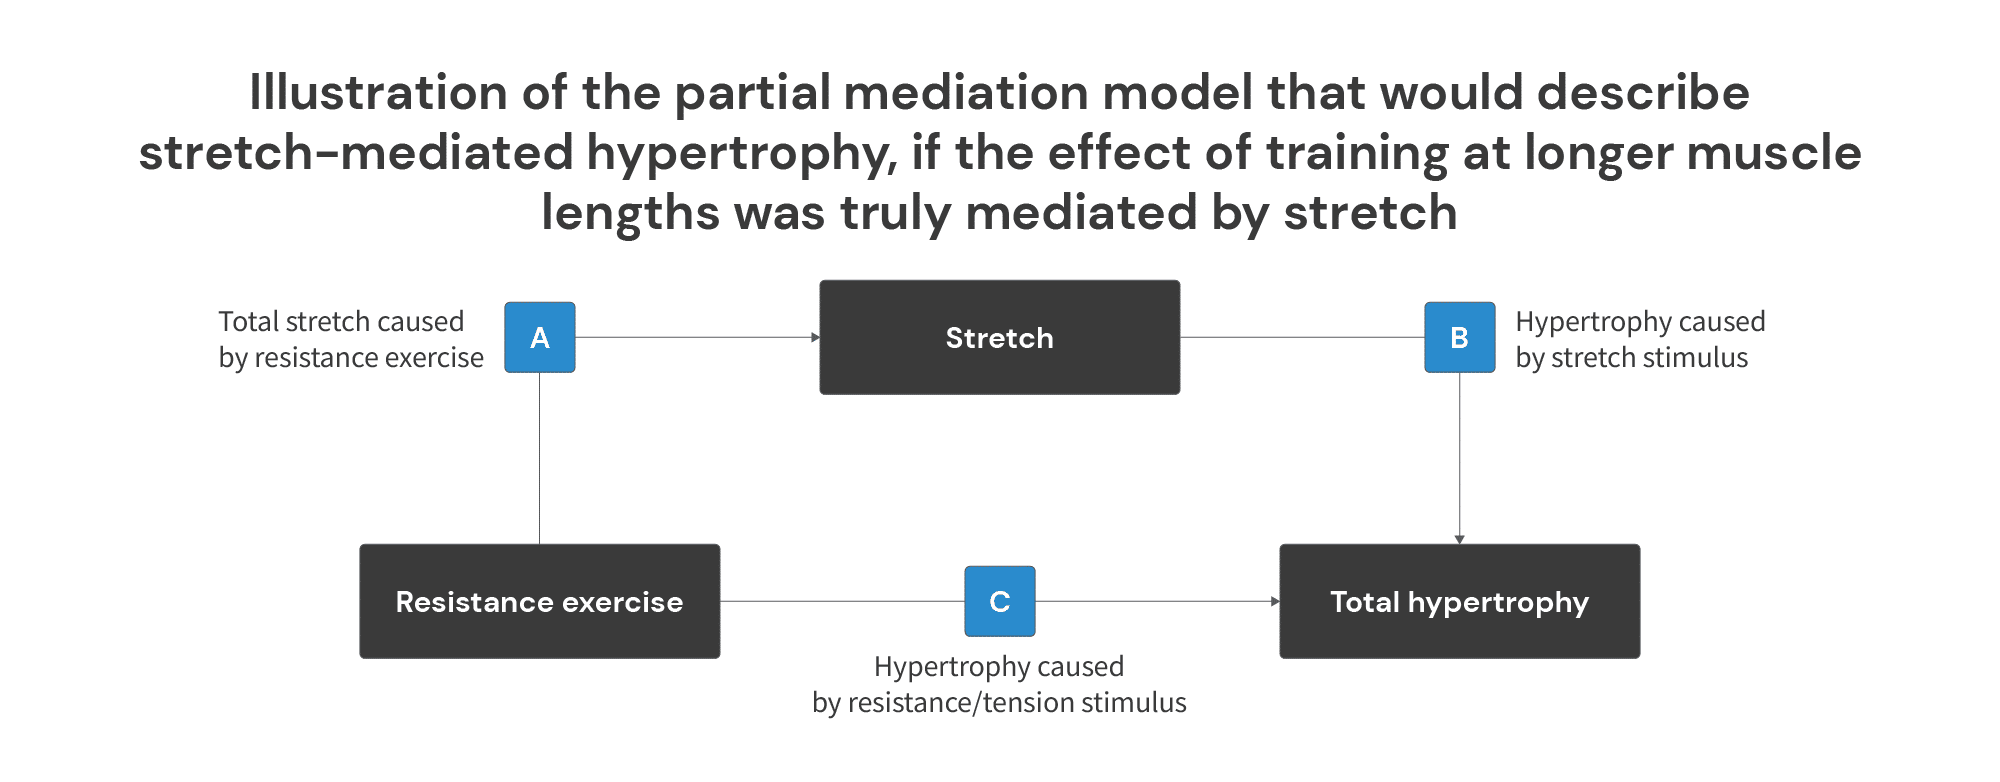 Illustration of the partial mediation model that would describe stretch-mediated hypertrophy